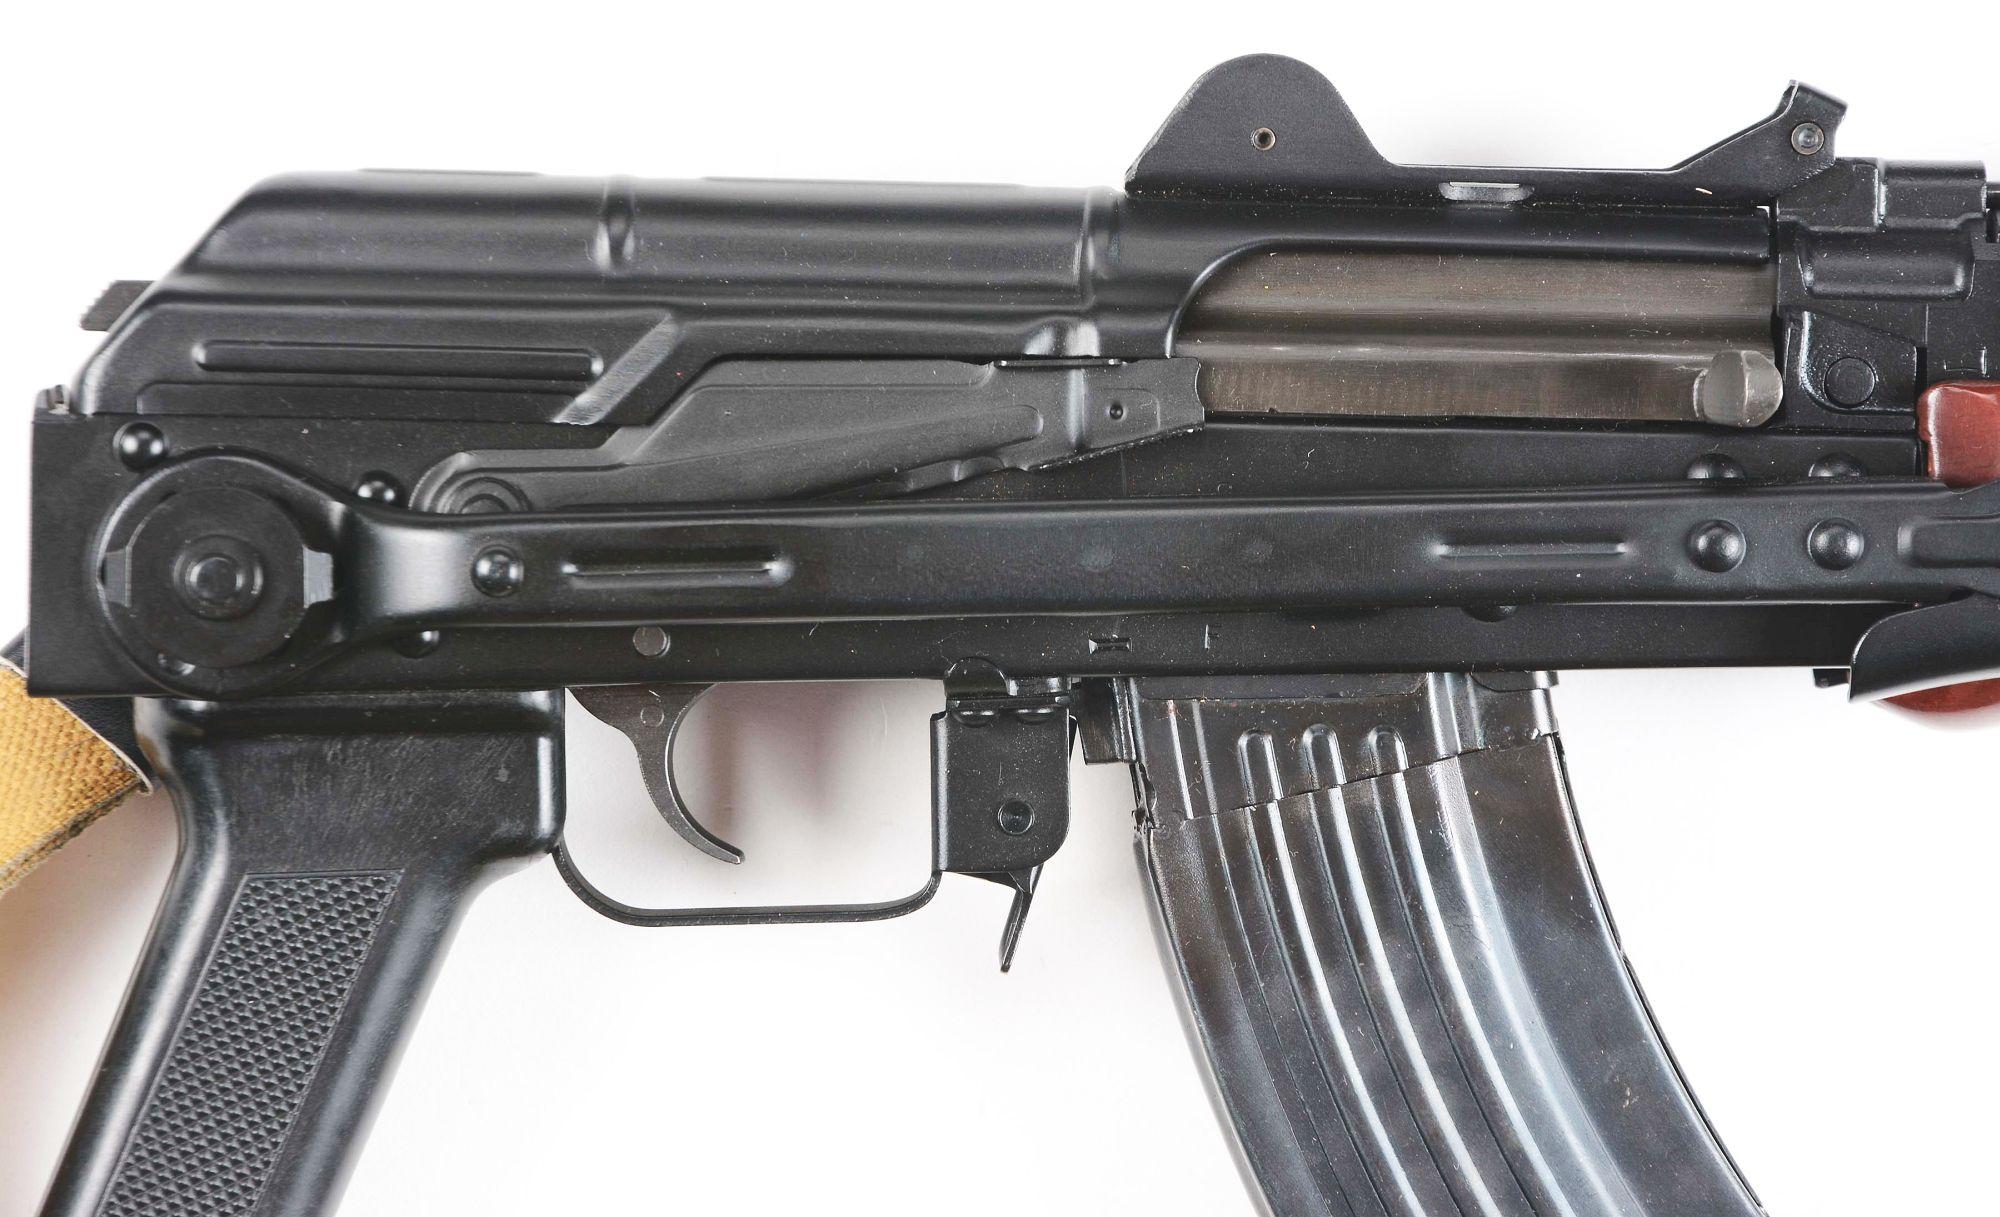 (N) Very Short and Compact ITM Arms Co “Peter Fleis” Converted MK-99 (*AK-47 Look Alike) Semi-Automa